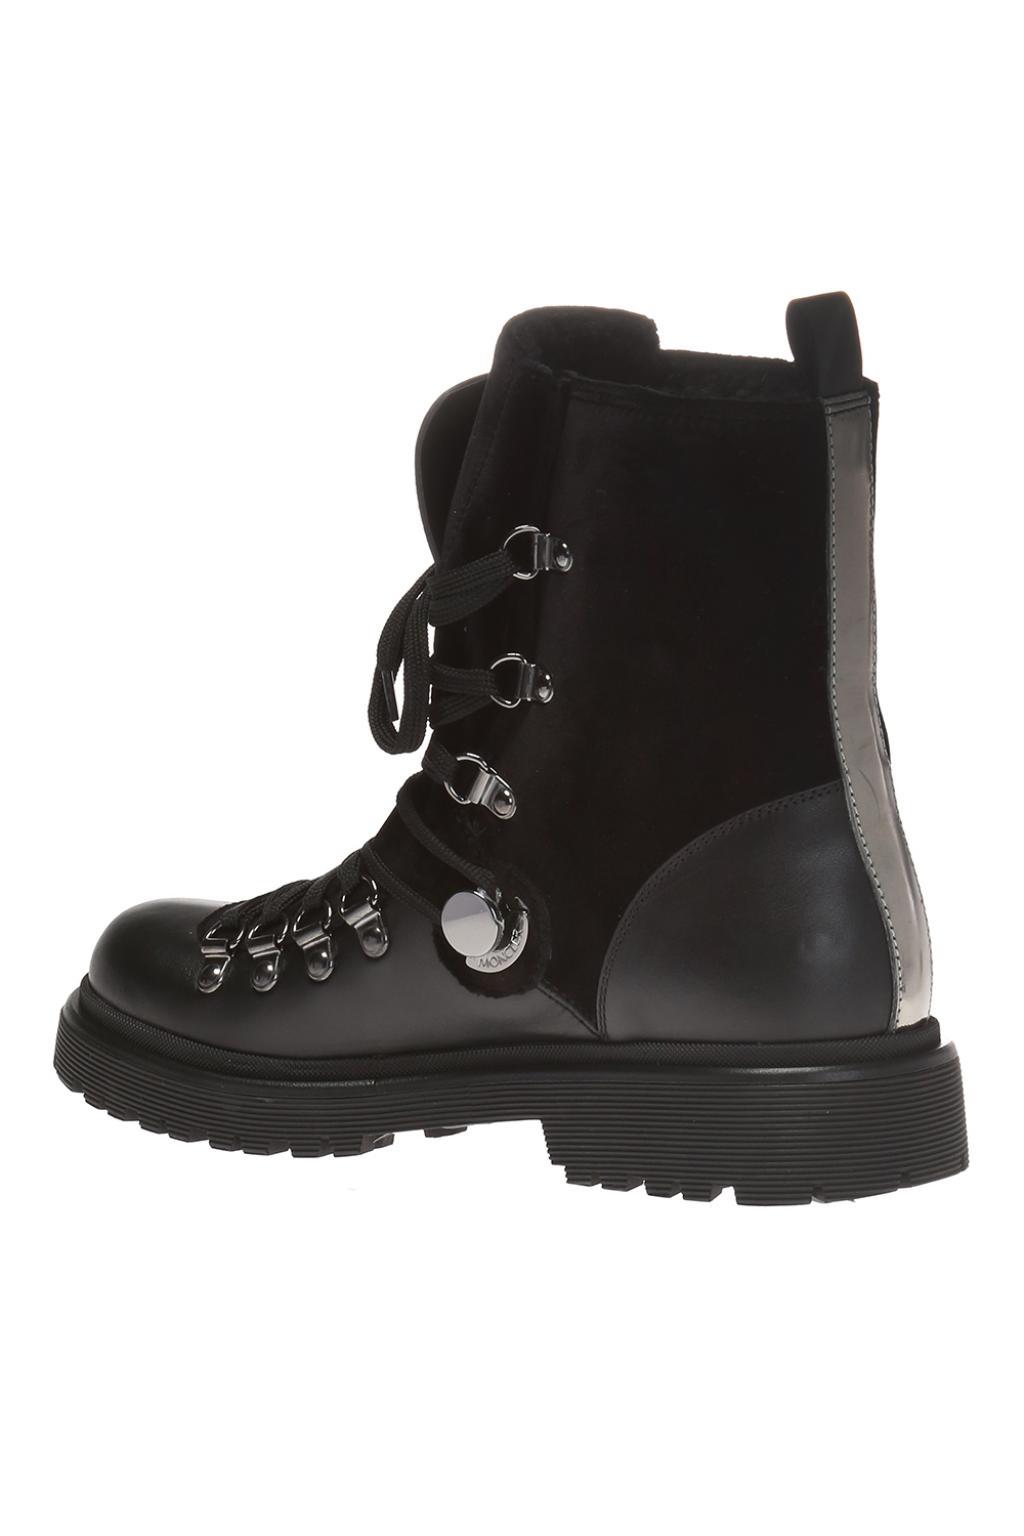 Moncler Fur 'berenice' Padded Boots in Black - Save 11% - Lyst